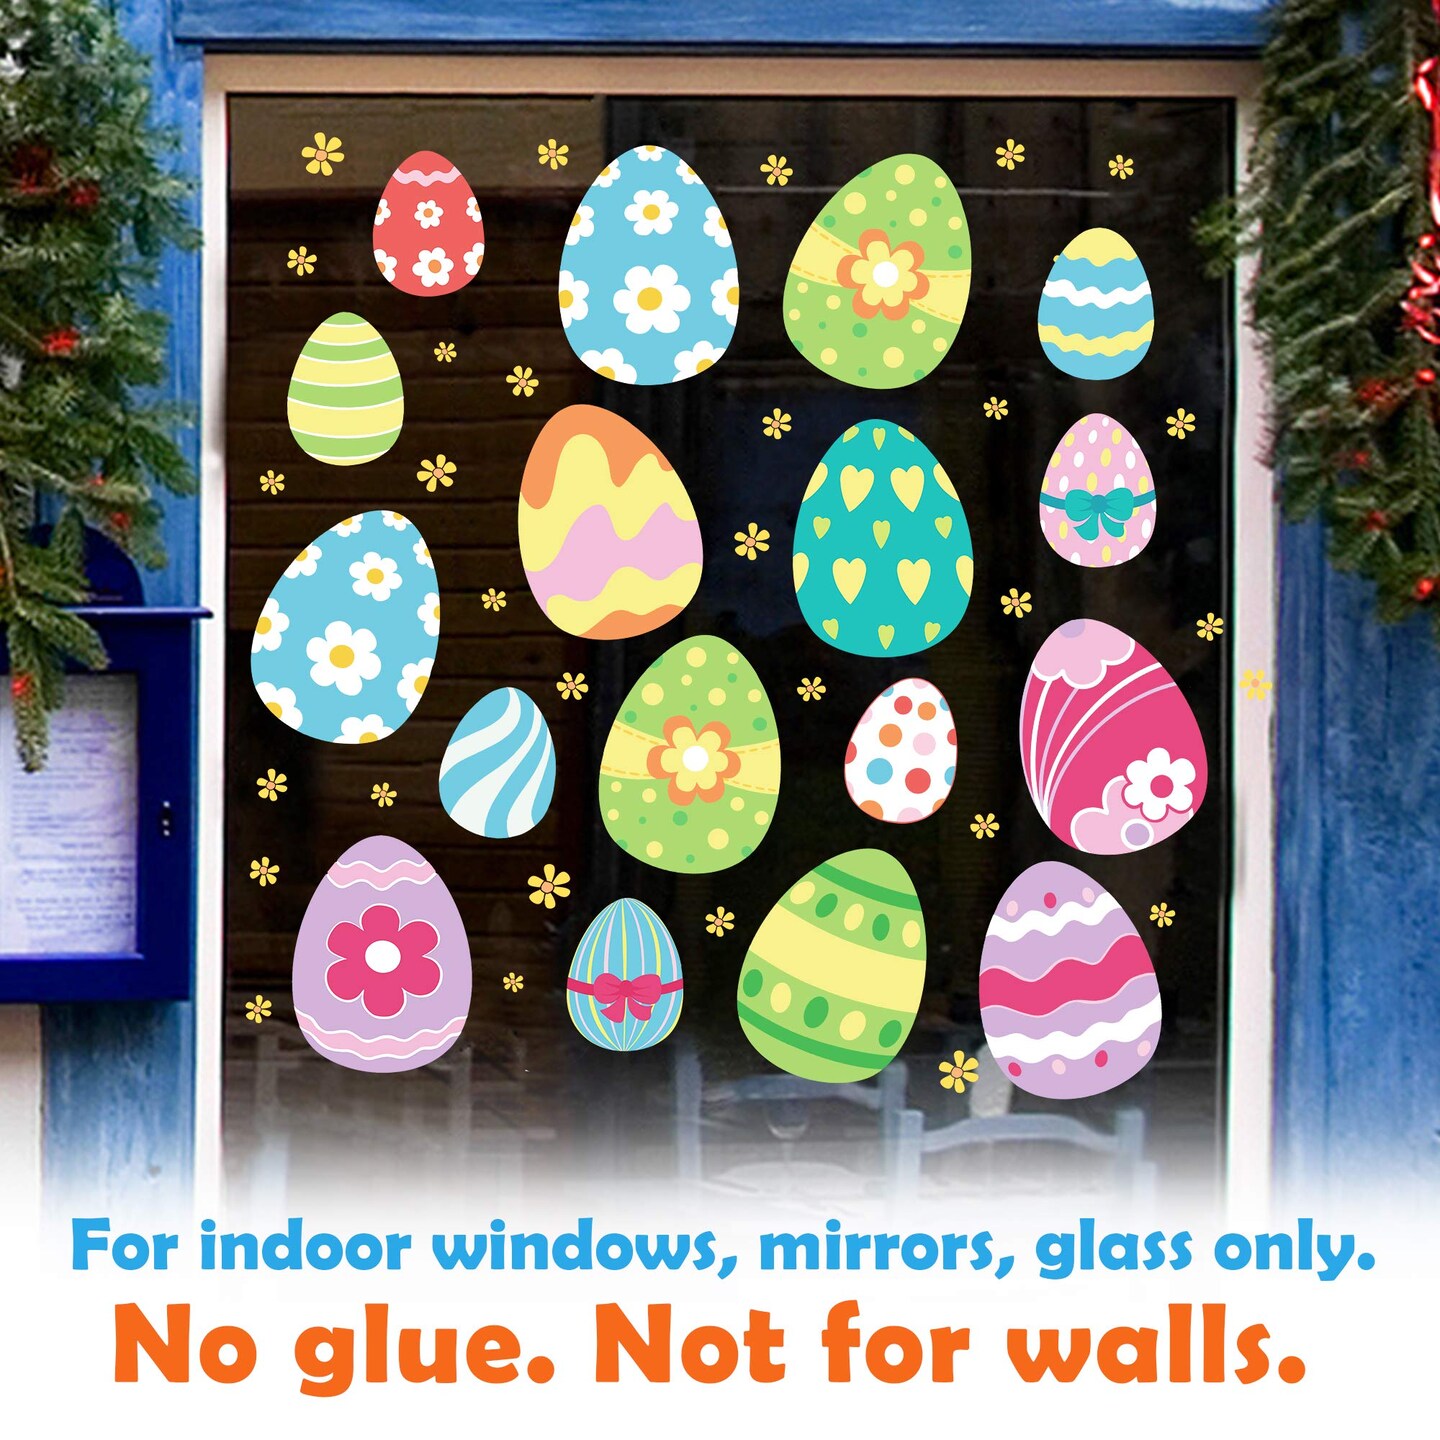 Ivenf Easter Decorations Window Clings Decals Decor, Extra Large Easter Eggs Flowers Party Supplies Gifts, Spring Window Clings Decorations for Kids School Home Office, 4 Sheets 46 pcs